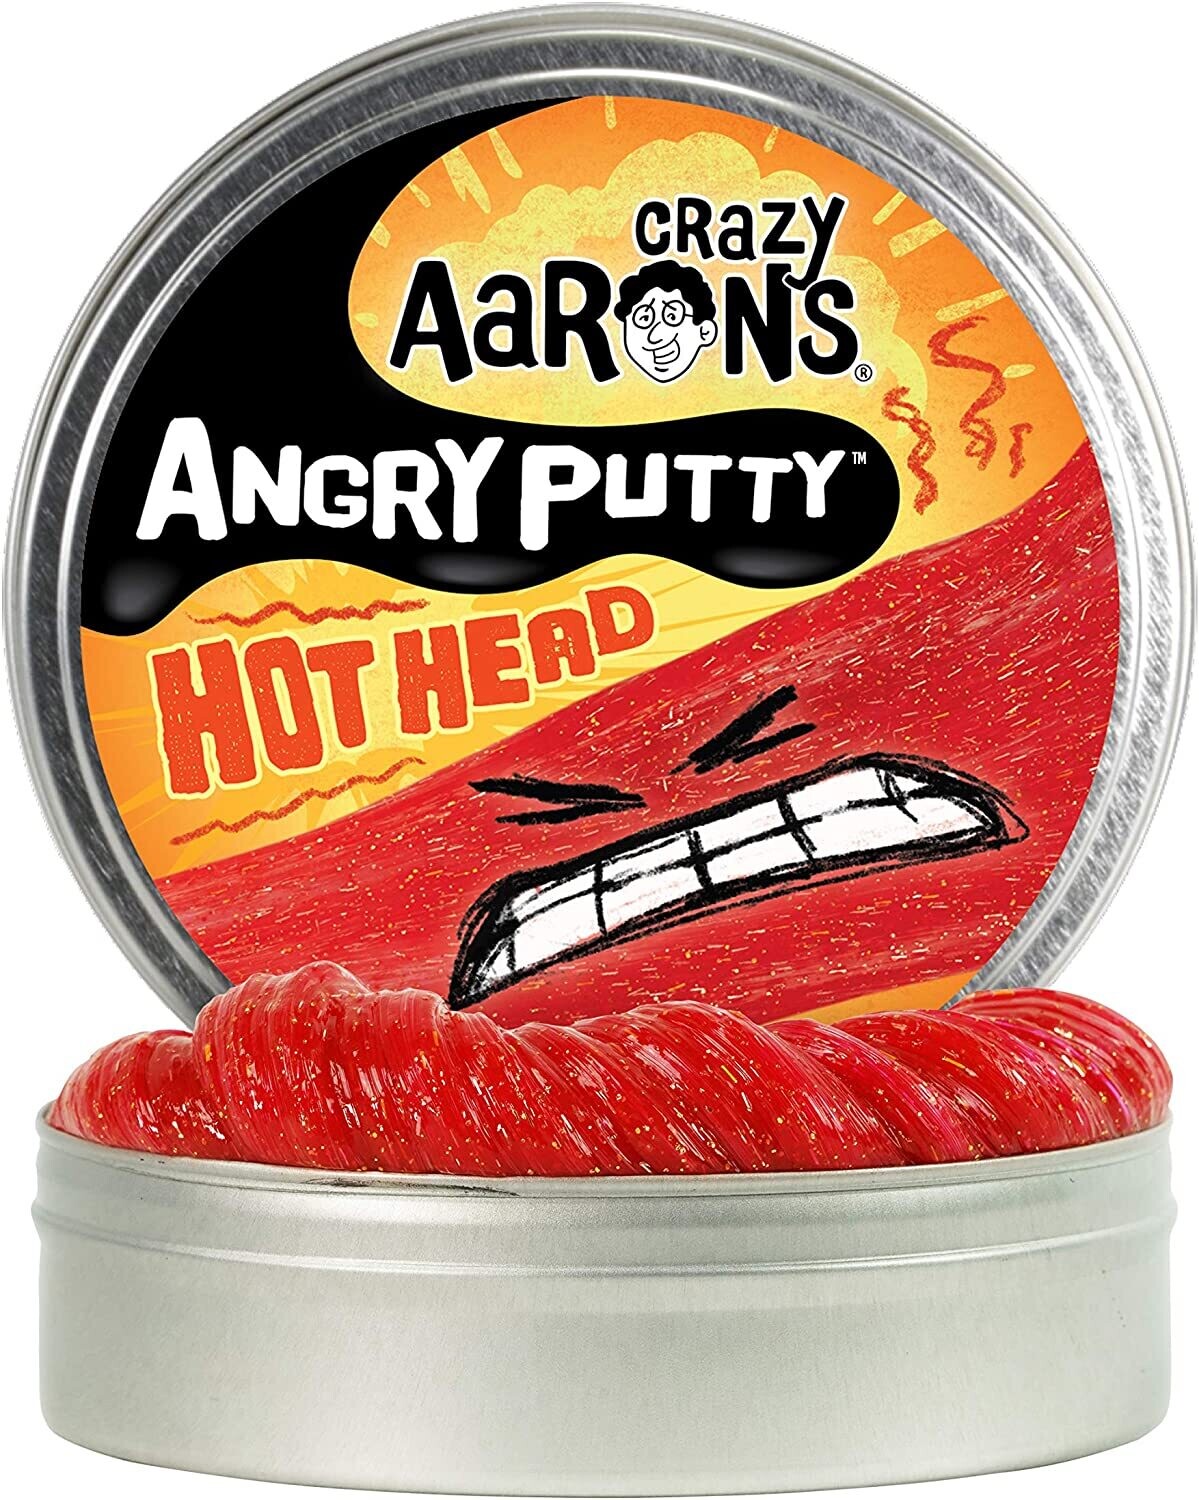 Crazy Aaron's Thinking Putty Angry Putty Hot Head